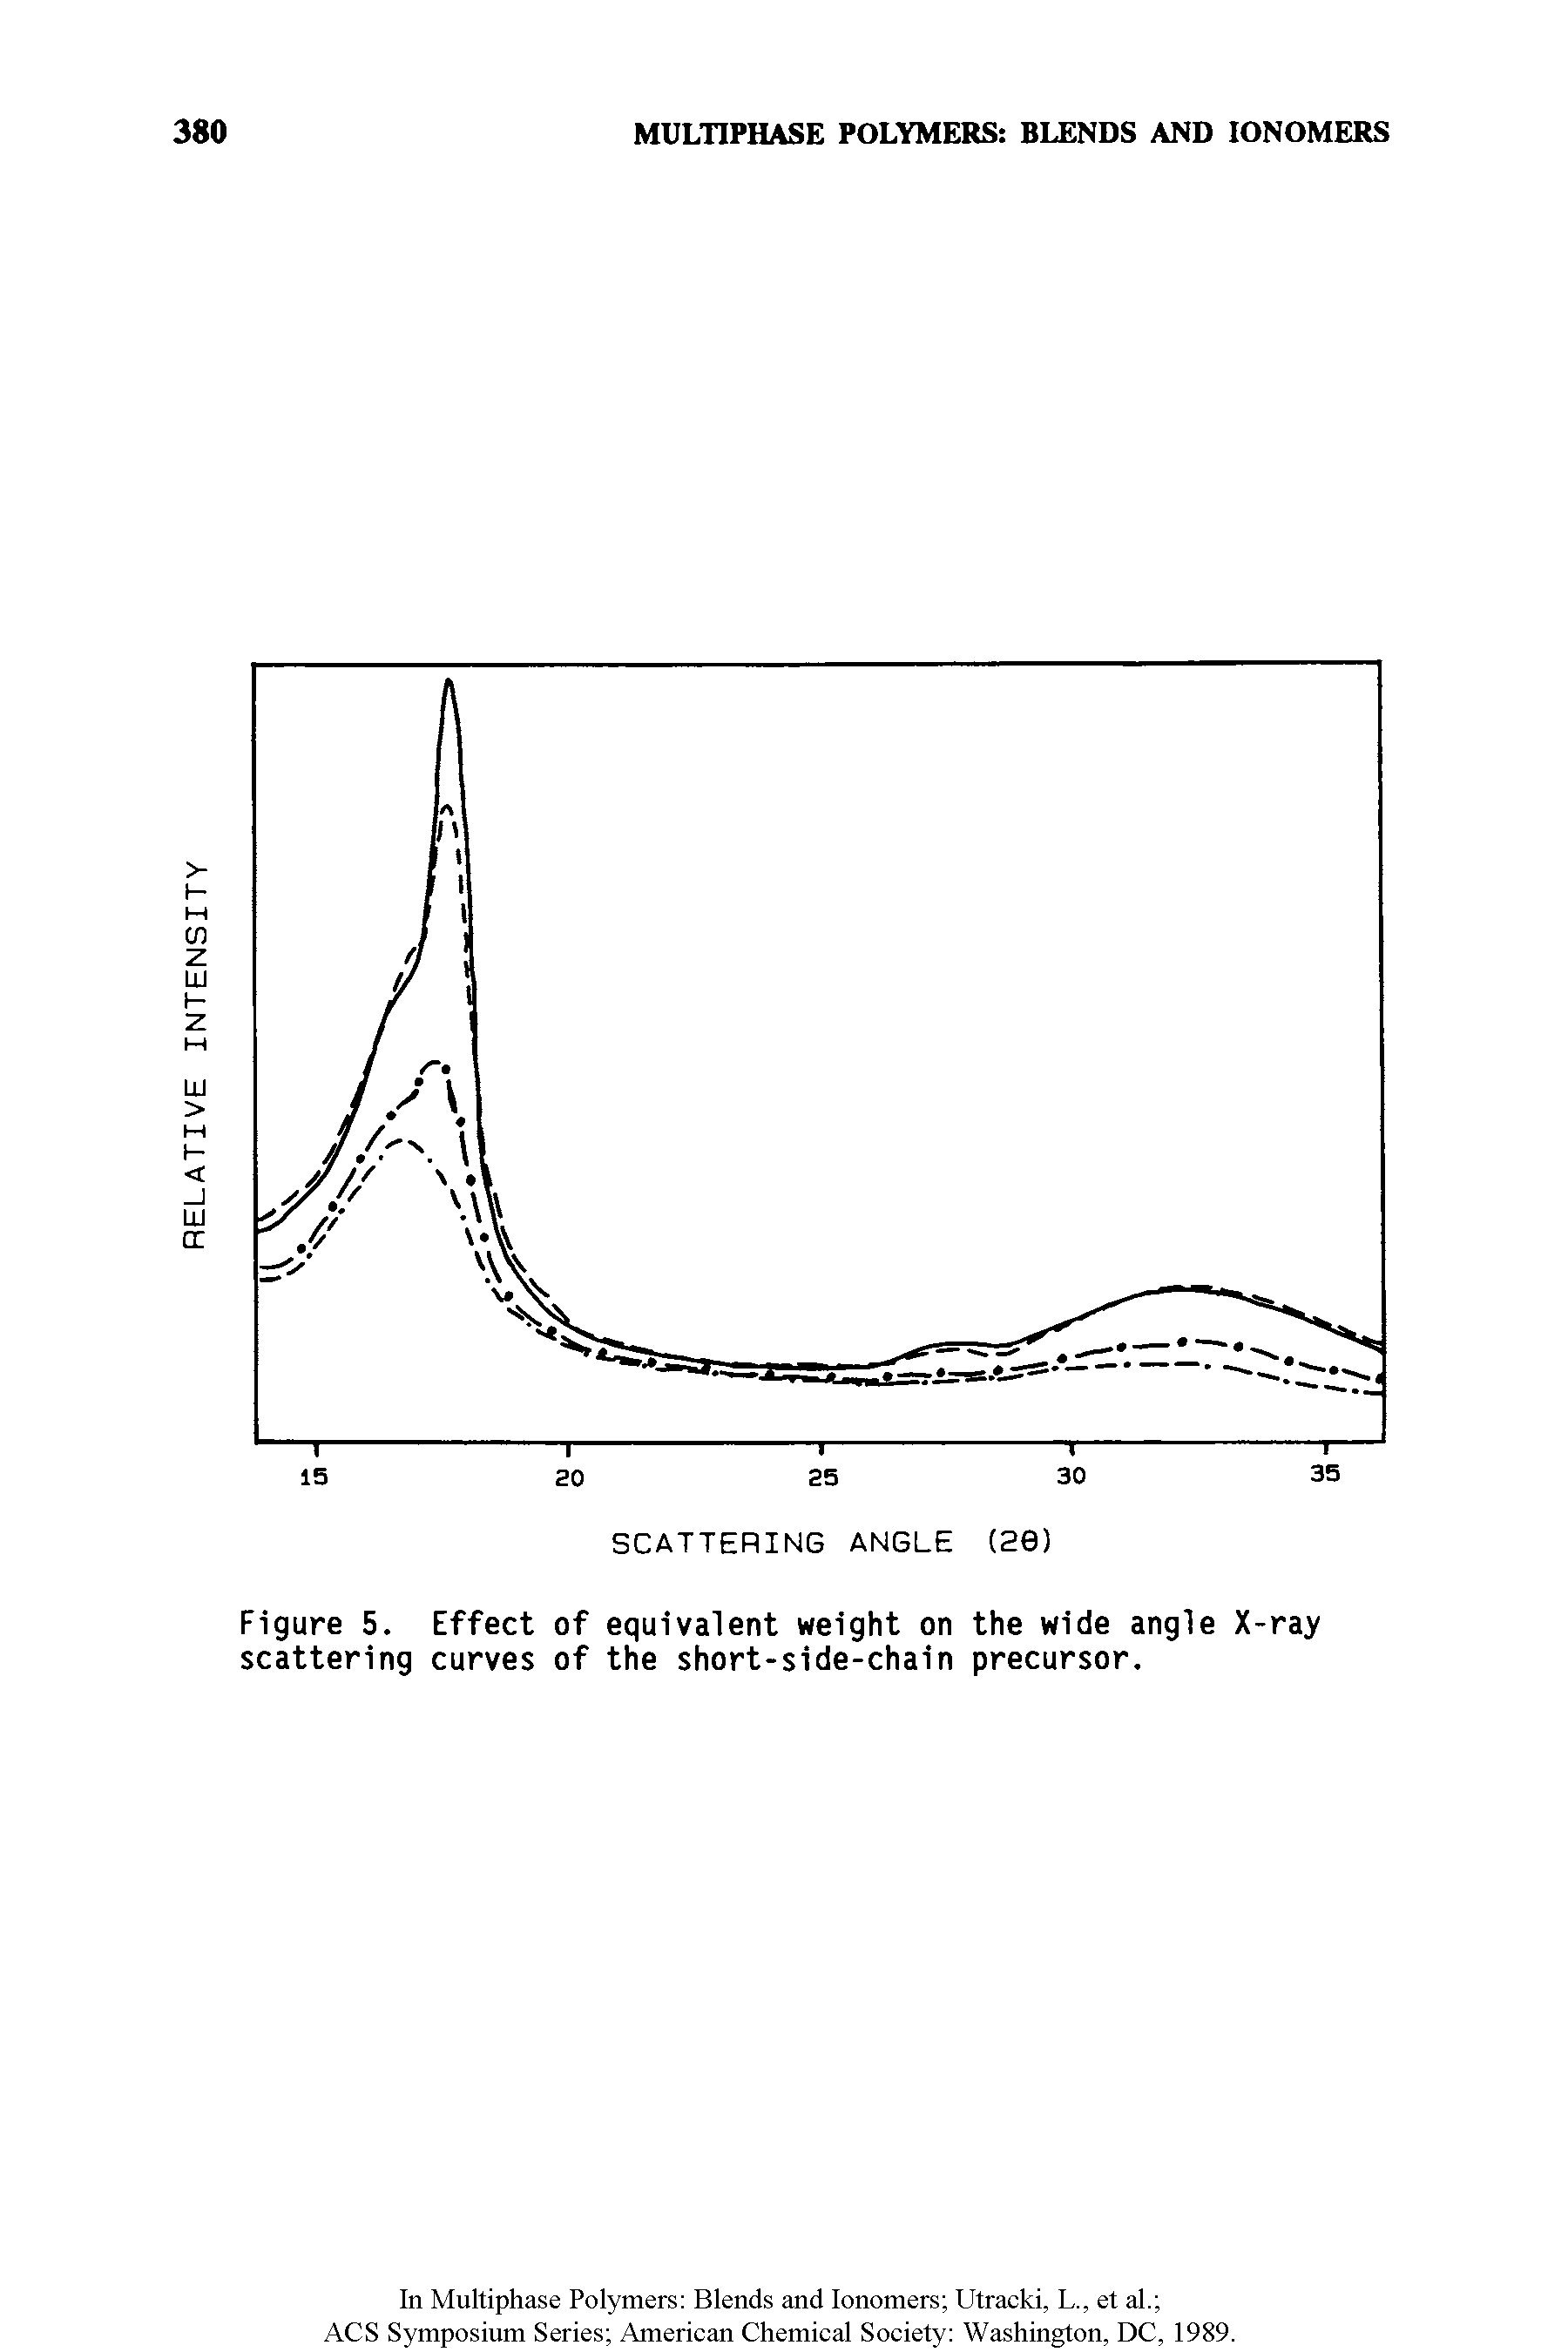 Figure 5. Effect of equivalent weight on the wide angle X-ray scattering curves of the short-side-chain precursor.